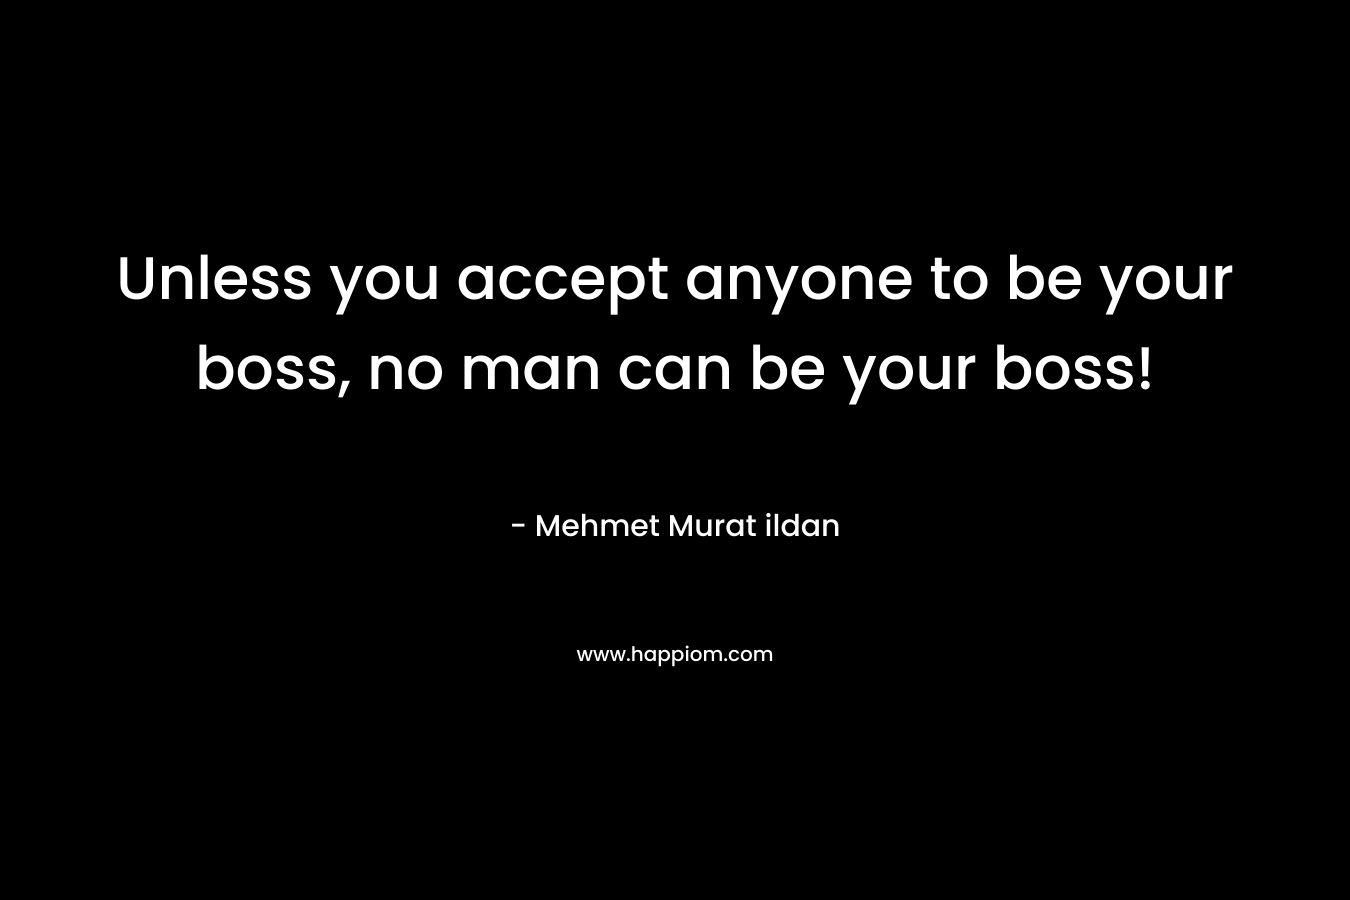 Unless you accept anyone to be your boss, no man can be your boss! – Mehmet Murat ildan